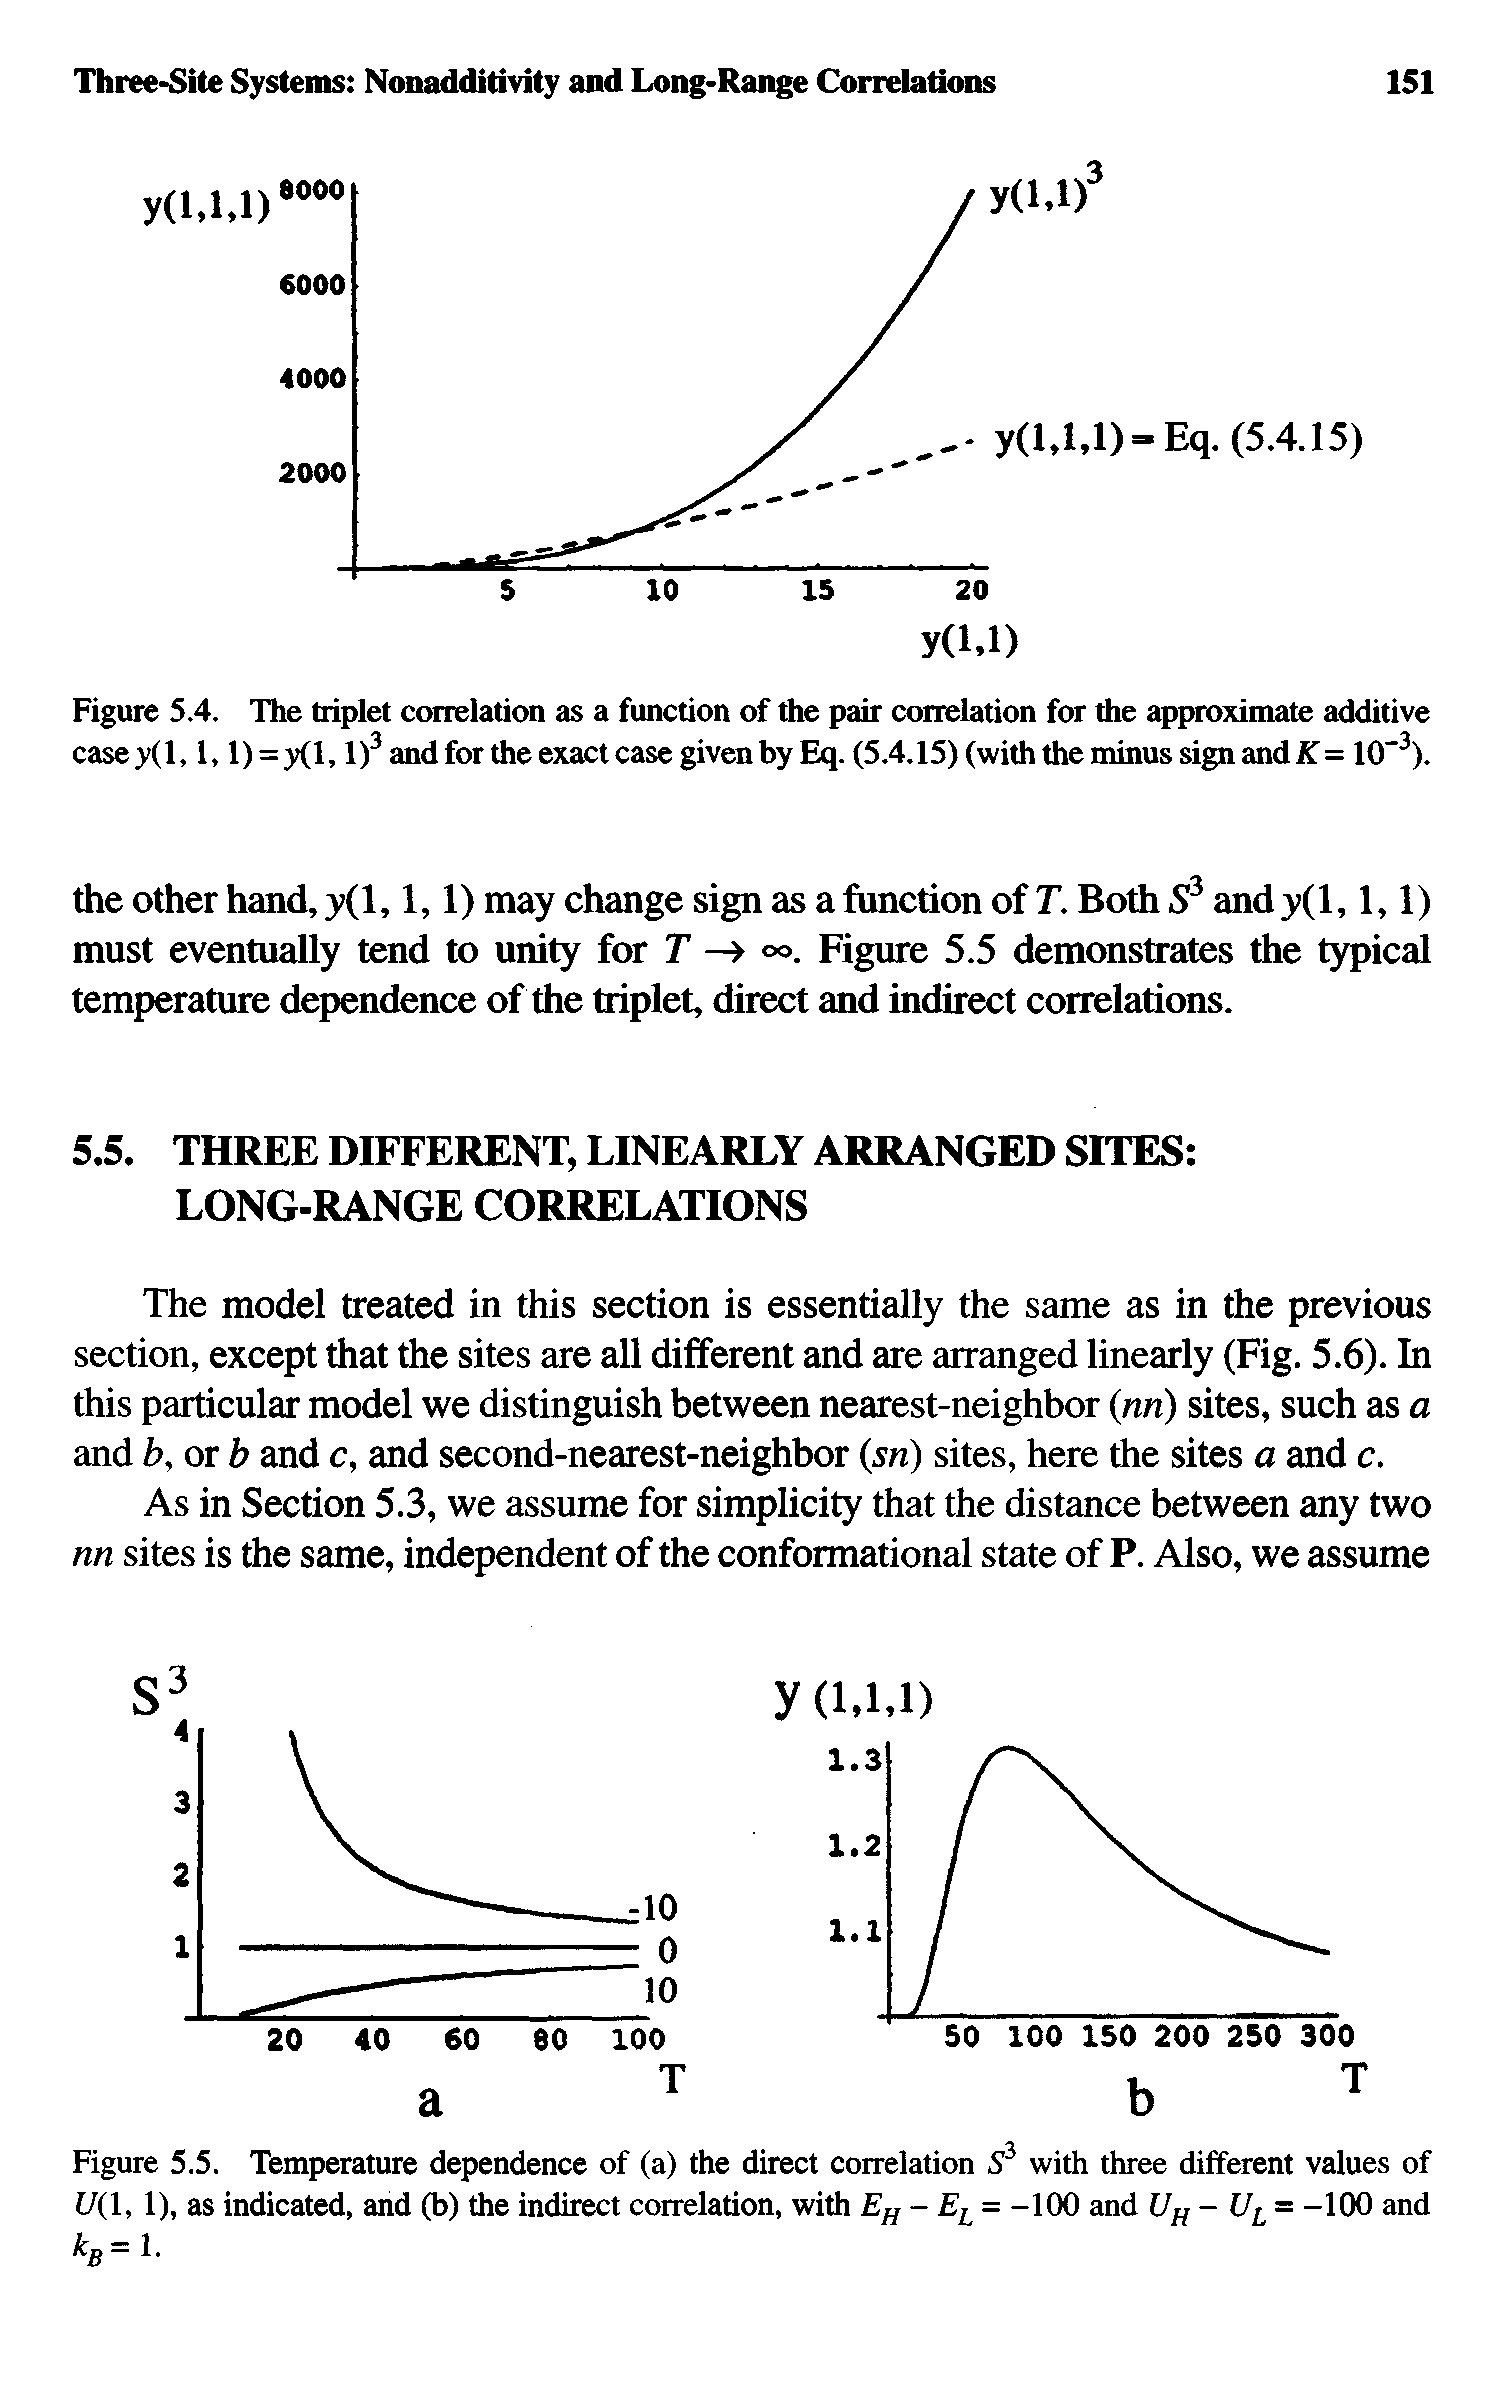 Figure 5.5. Temperature dependence of (a) the direct correlation with three different values of t/(l, 1), as indicated, and (b) the indirect correlation, with = -100 and Uu Ui = -100 and...